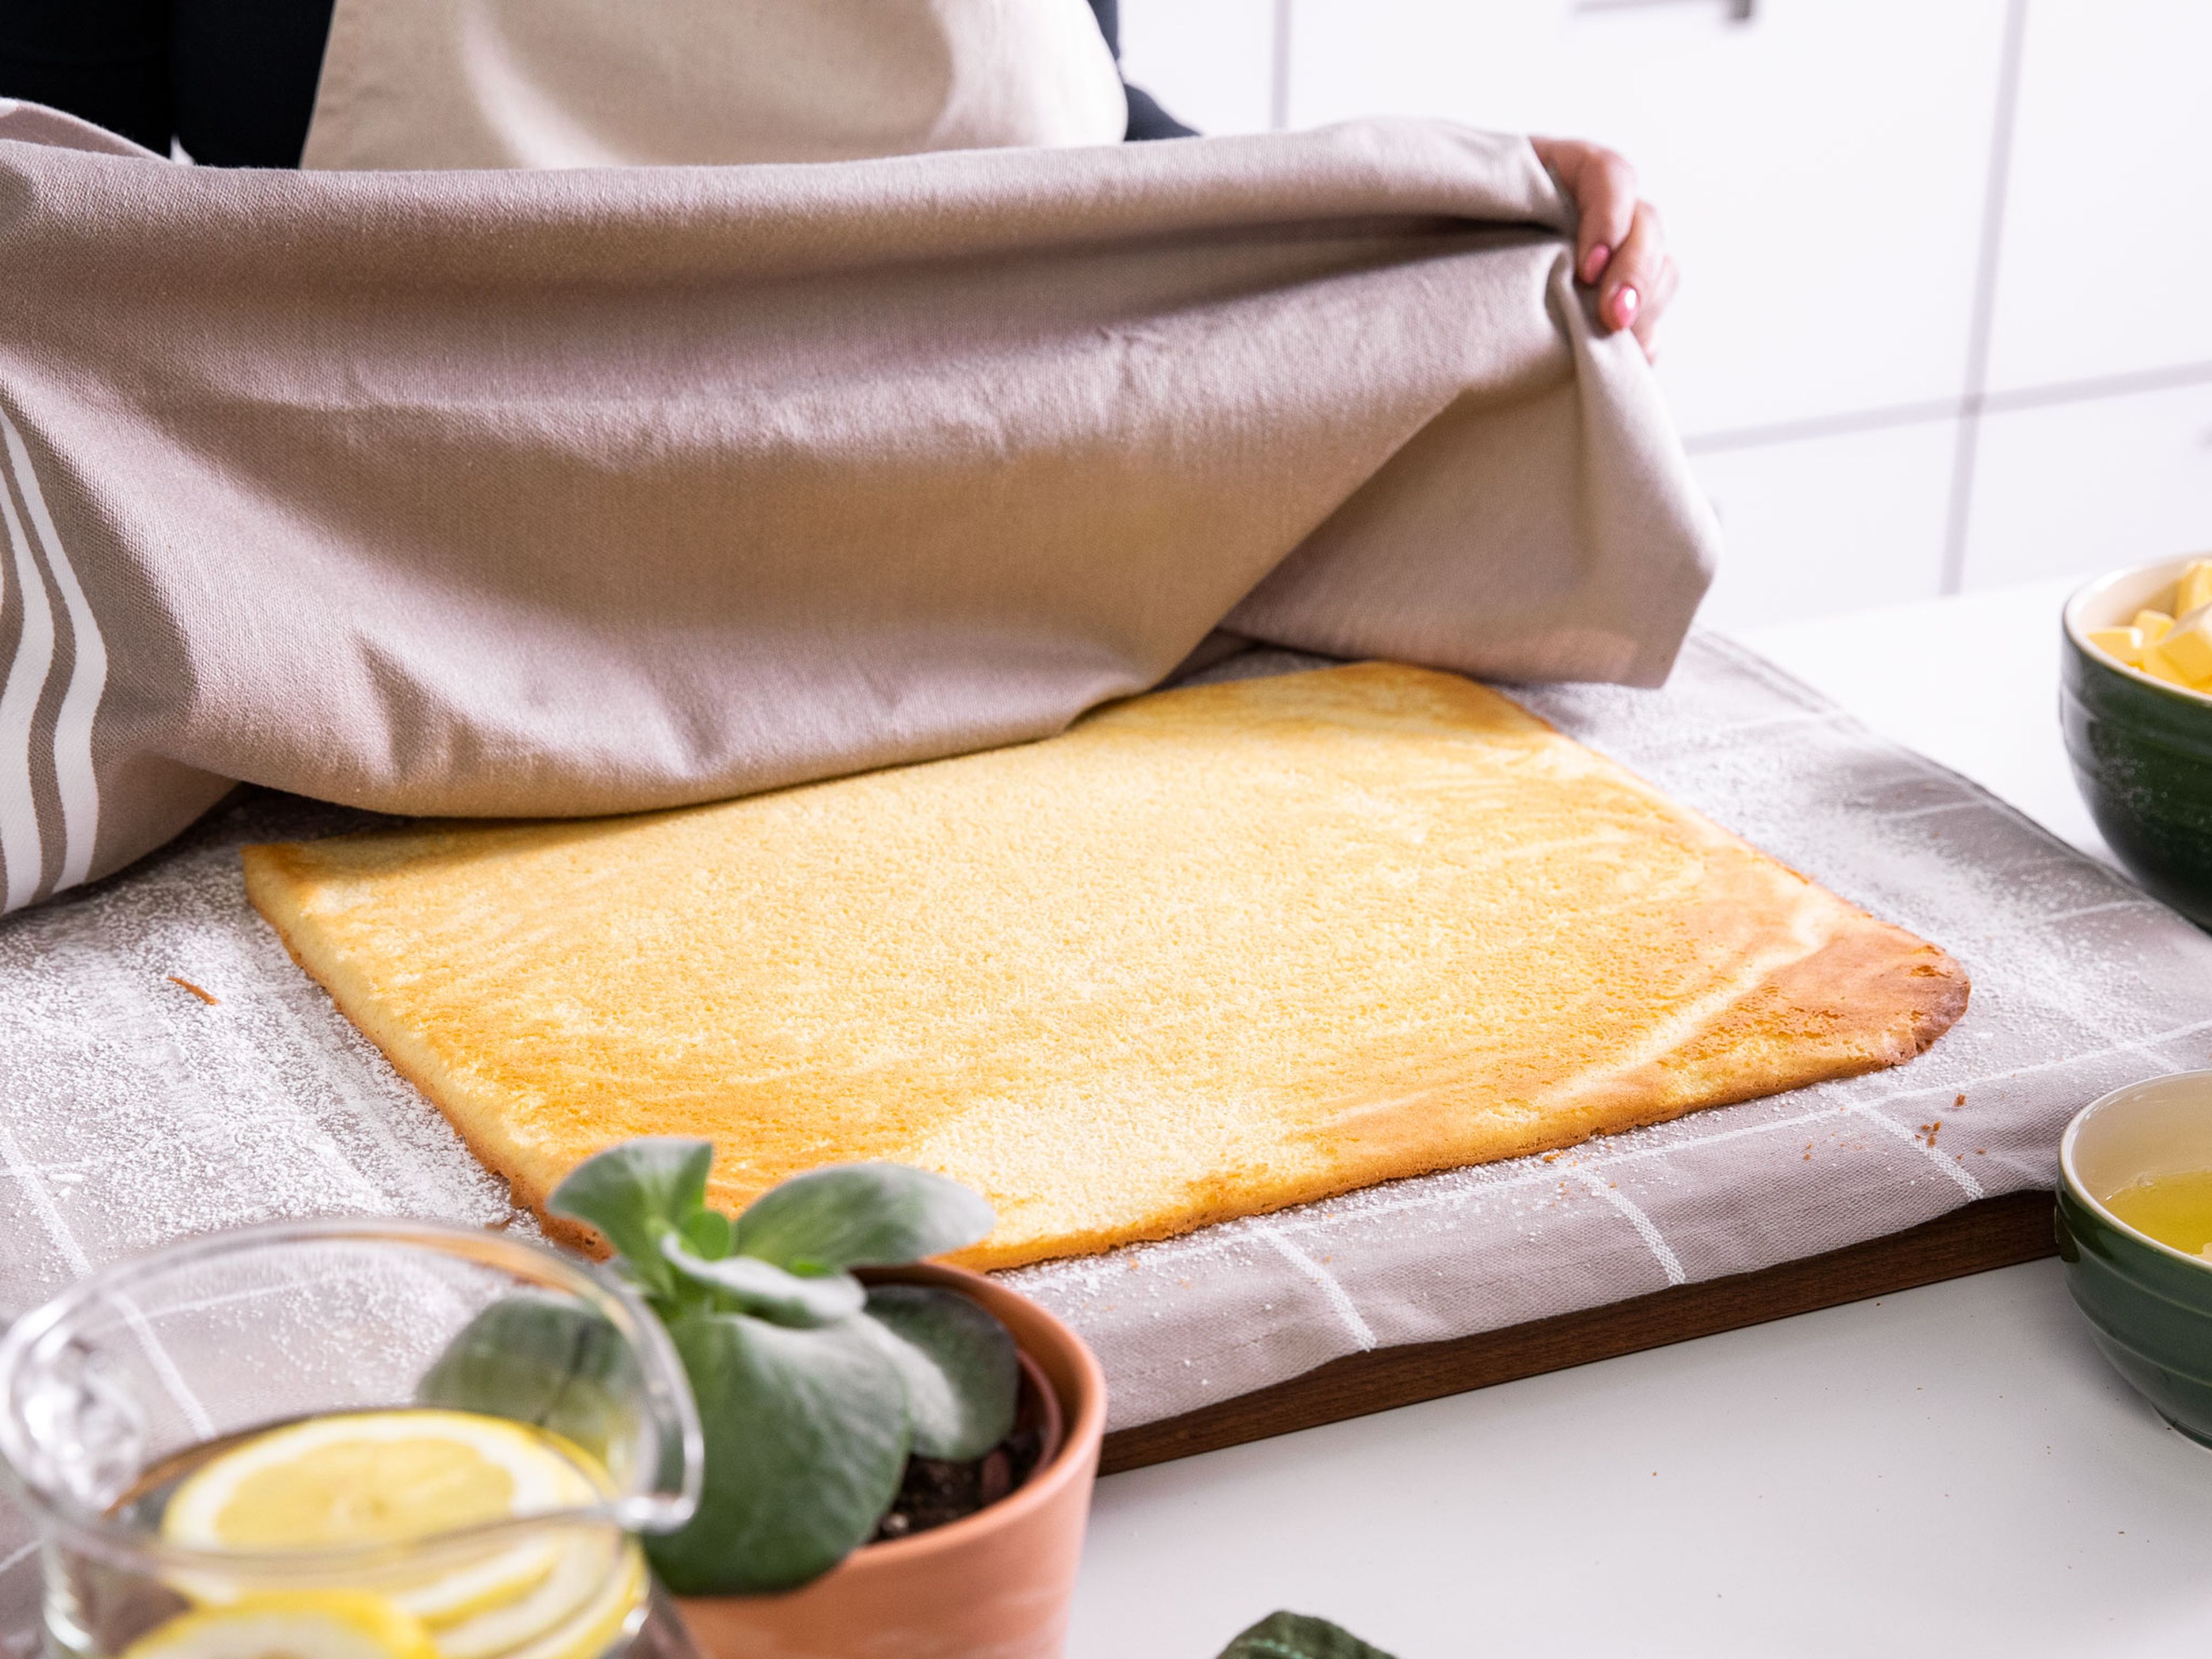 Spread batter on a parchment-lined baking sheet. Bake at 180°C/355°F for approx. 10 min. In the meantime, dust a clean kitchen towel with confectioner’s sugar. Once the cake is done, remove from the oven and invert it onto the kitchen towel. Remove parchment paper and cover the cake with a second moistened kitchen towel. Carefully roll cake and towels and let cool.